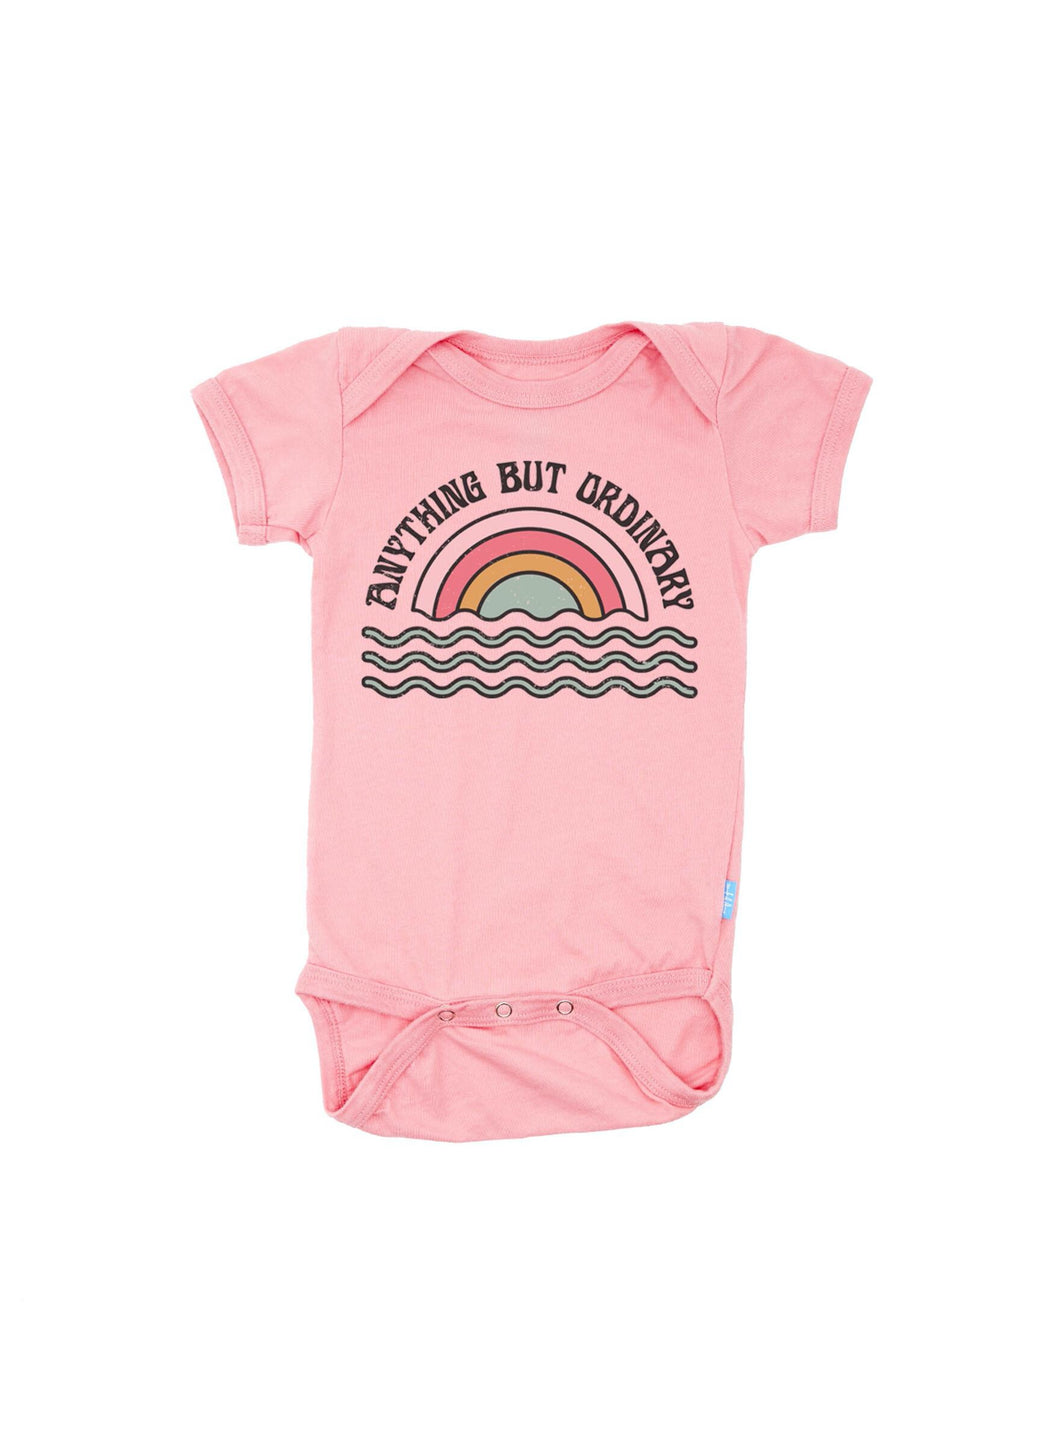 New Born, 6mos, 12mos - Anything But Ordinary Onesie in Quartz Pink